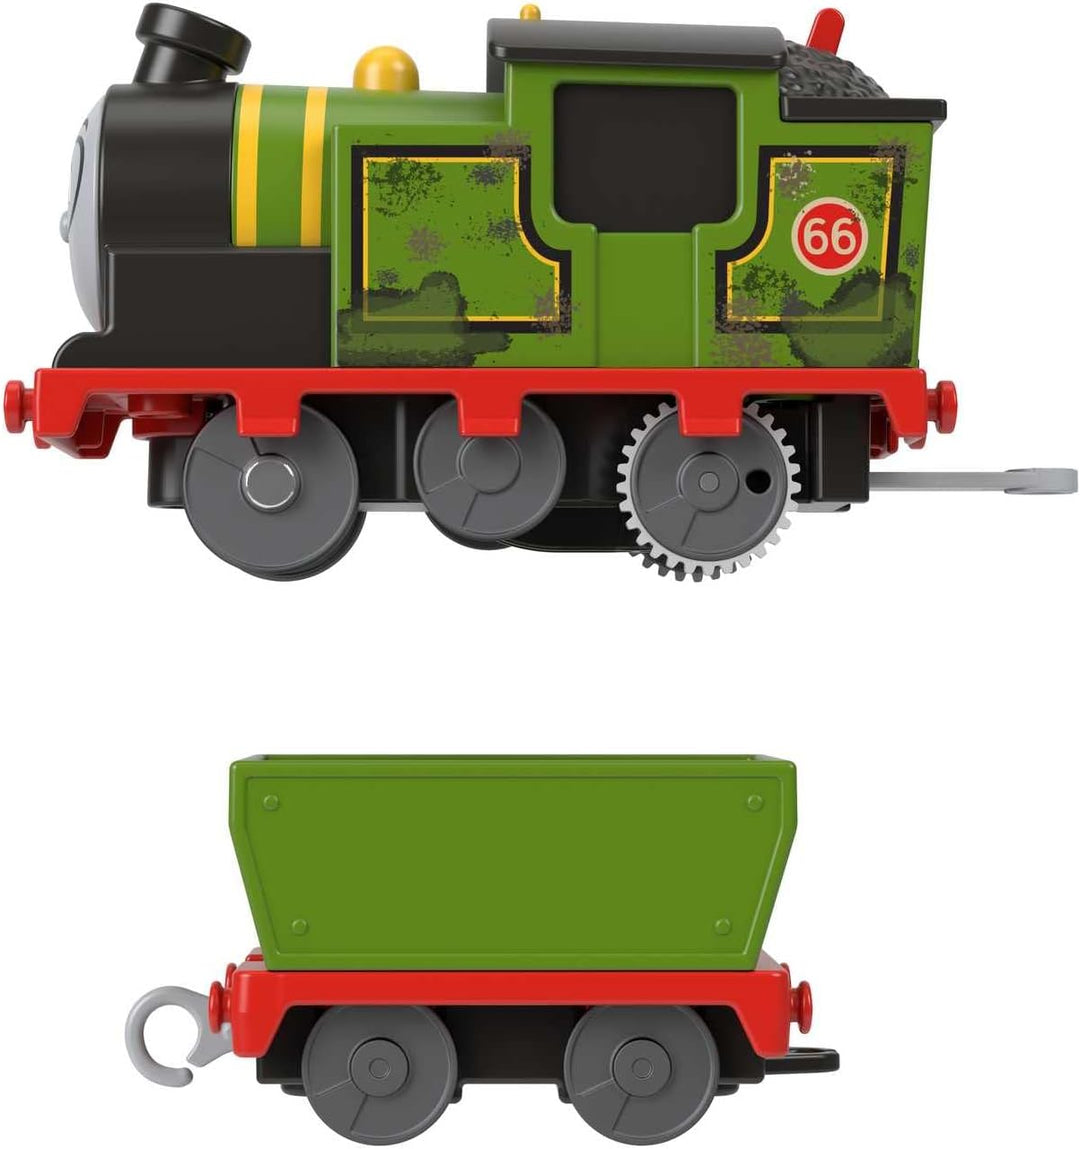 ?Fisher-Price Thomas and Friends Whiff Toy Train, Battery-Powered Motorized Train Engine and Cargo Car